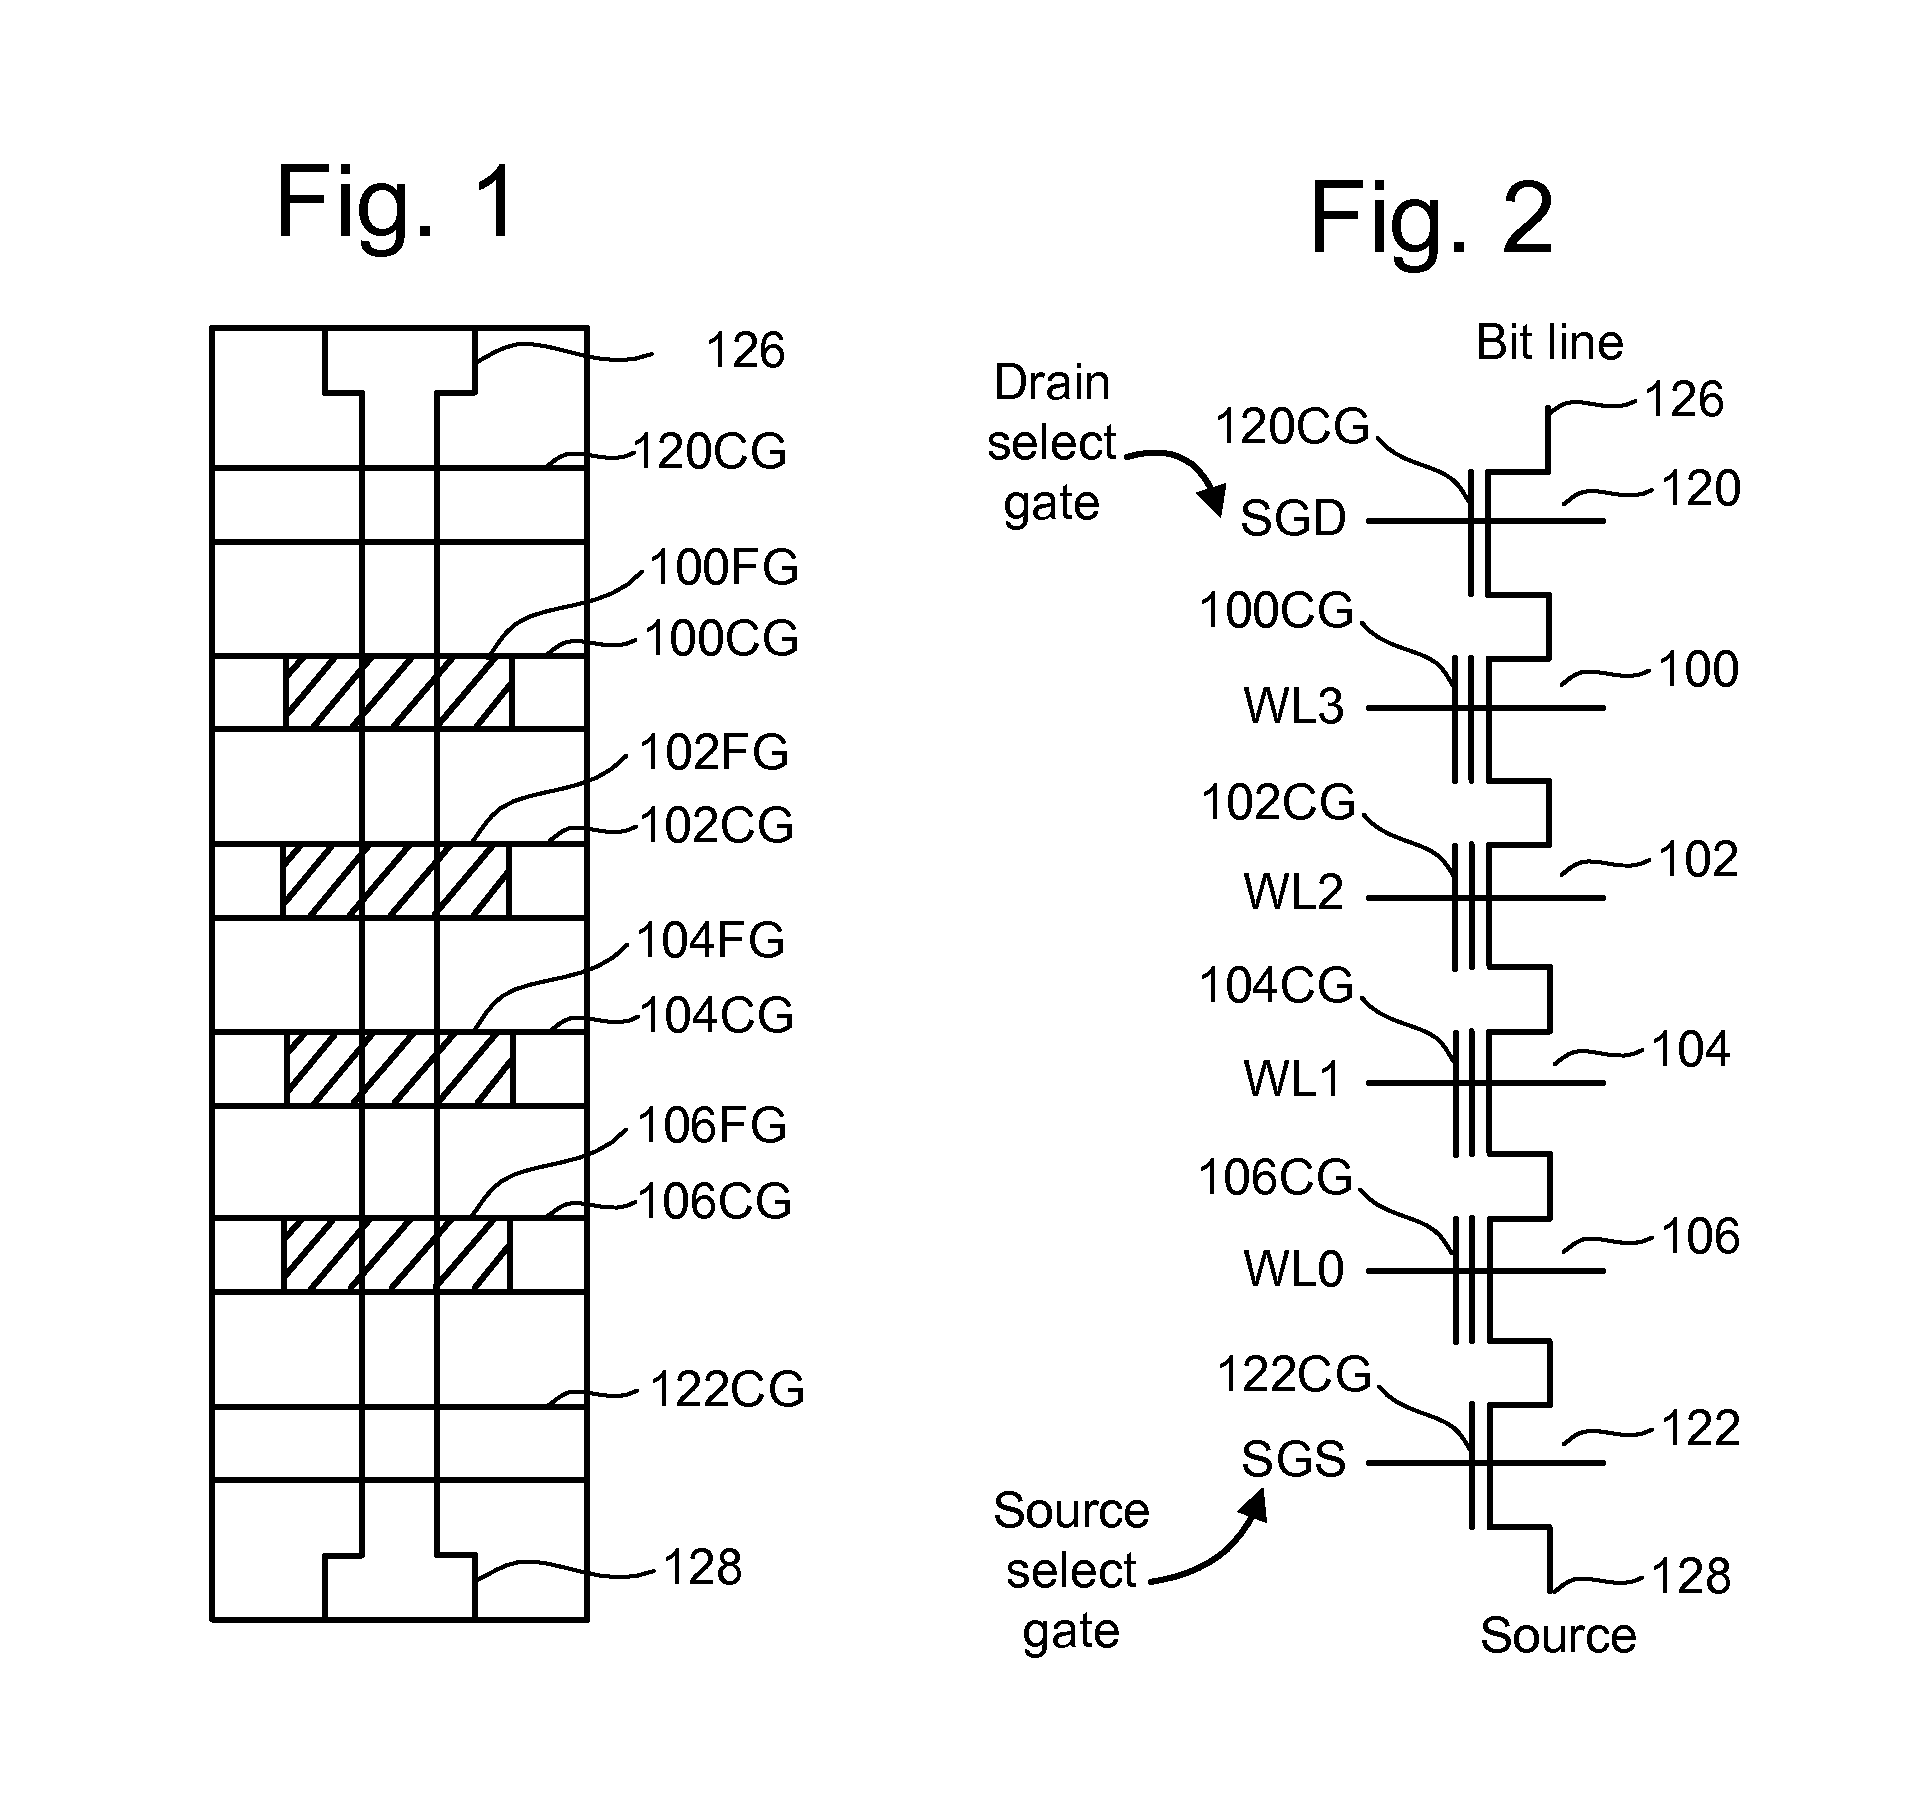 Non-volatile memory with local boosting control implant